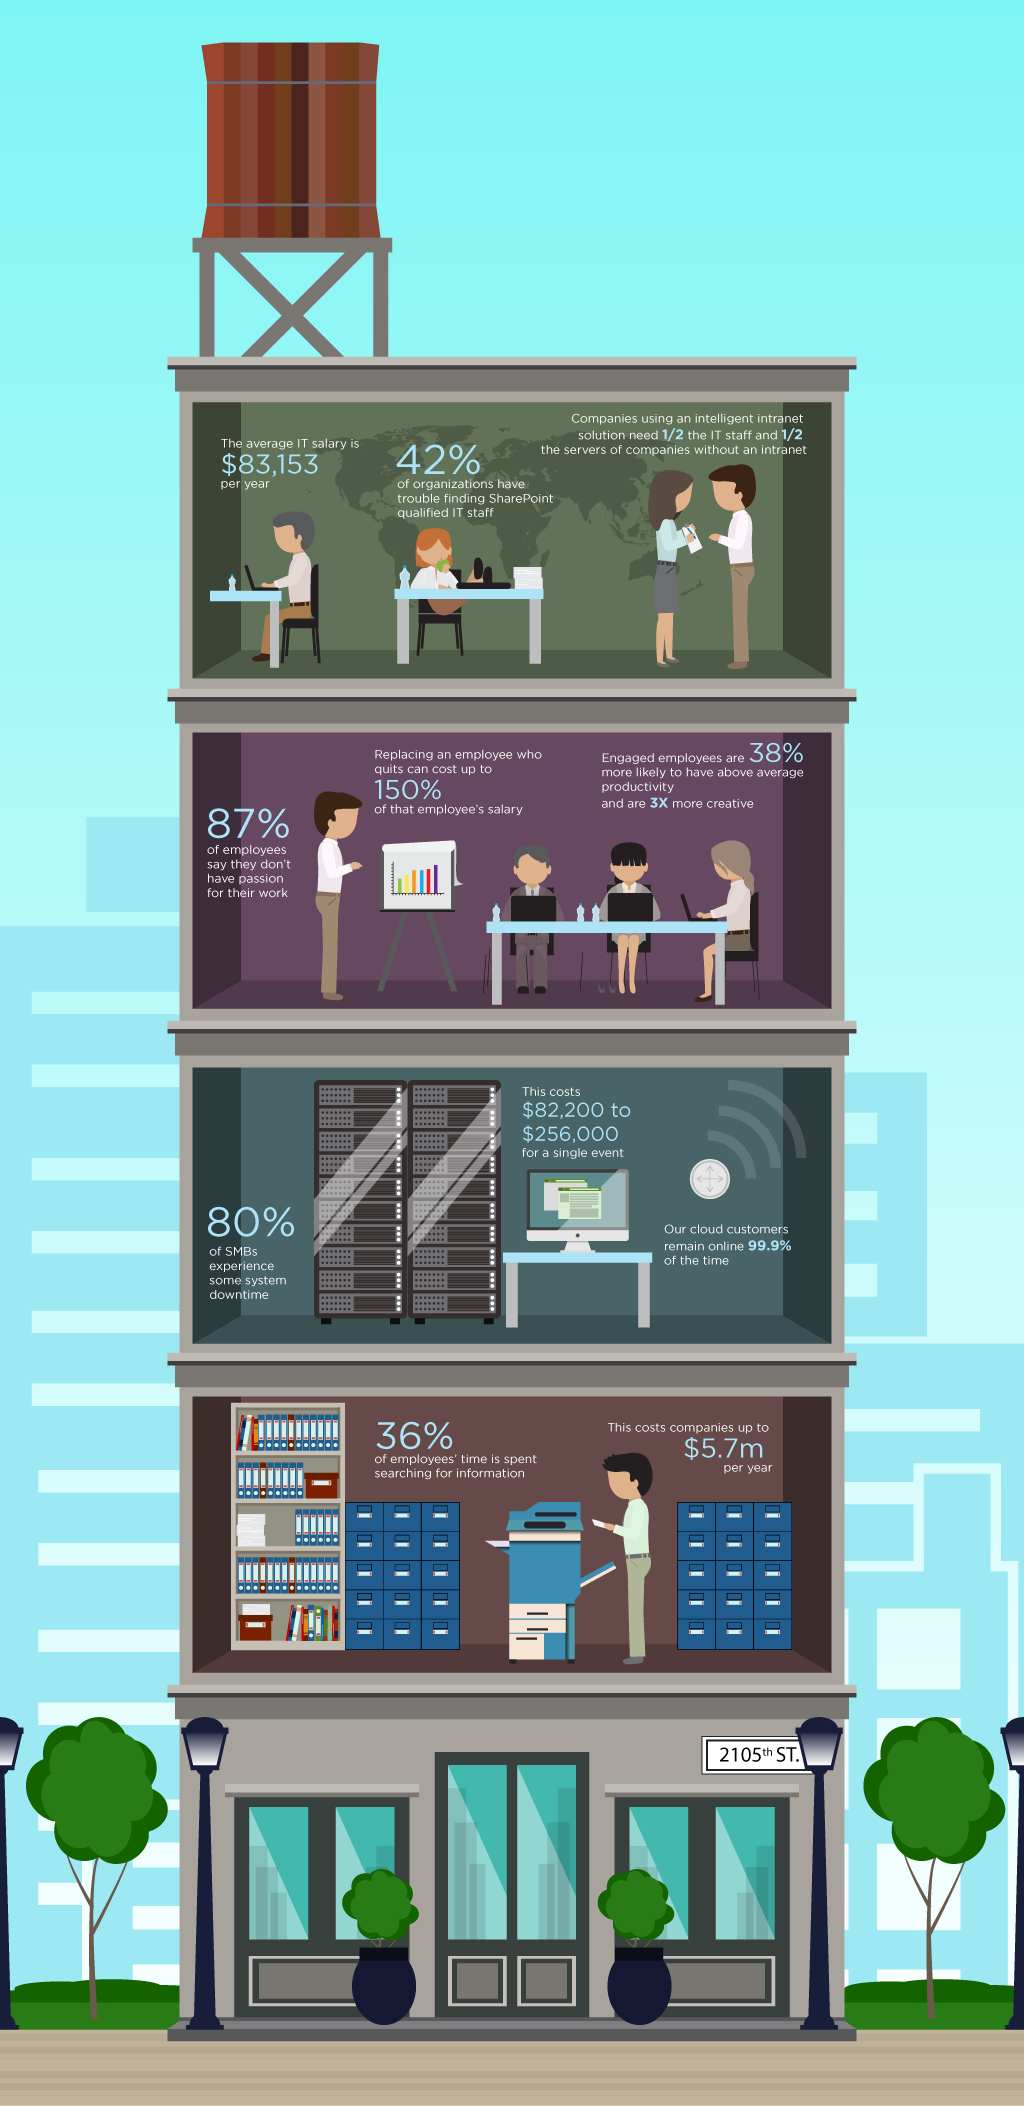 The 4 building blocks of intranet ROI [infographic]